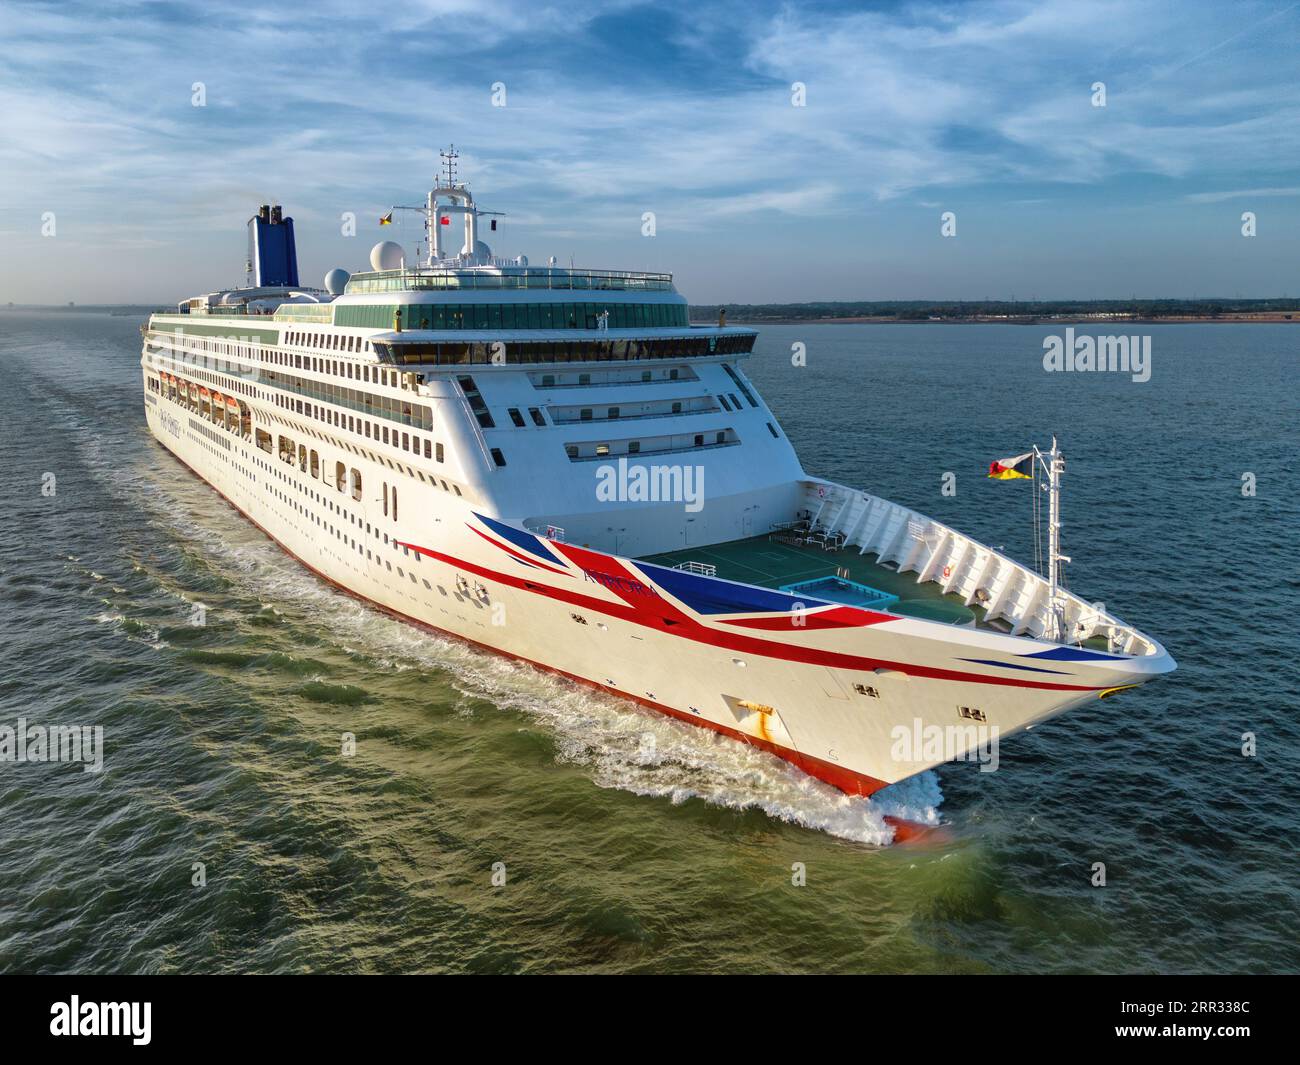 Aurora is a cruise ship operated by P&O Cruises, part of the Carnival Corporation. Stock Photo